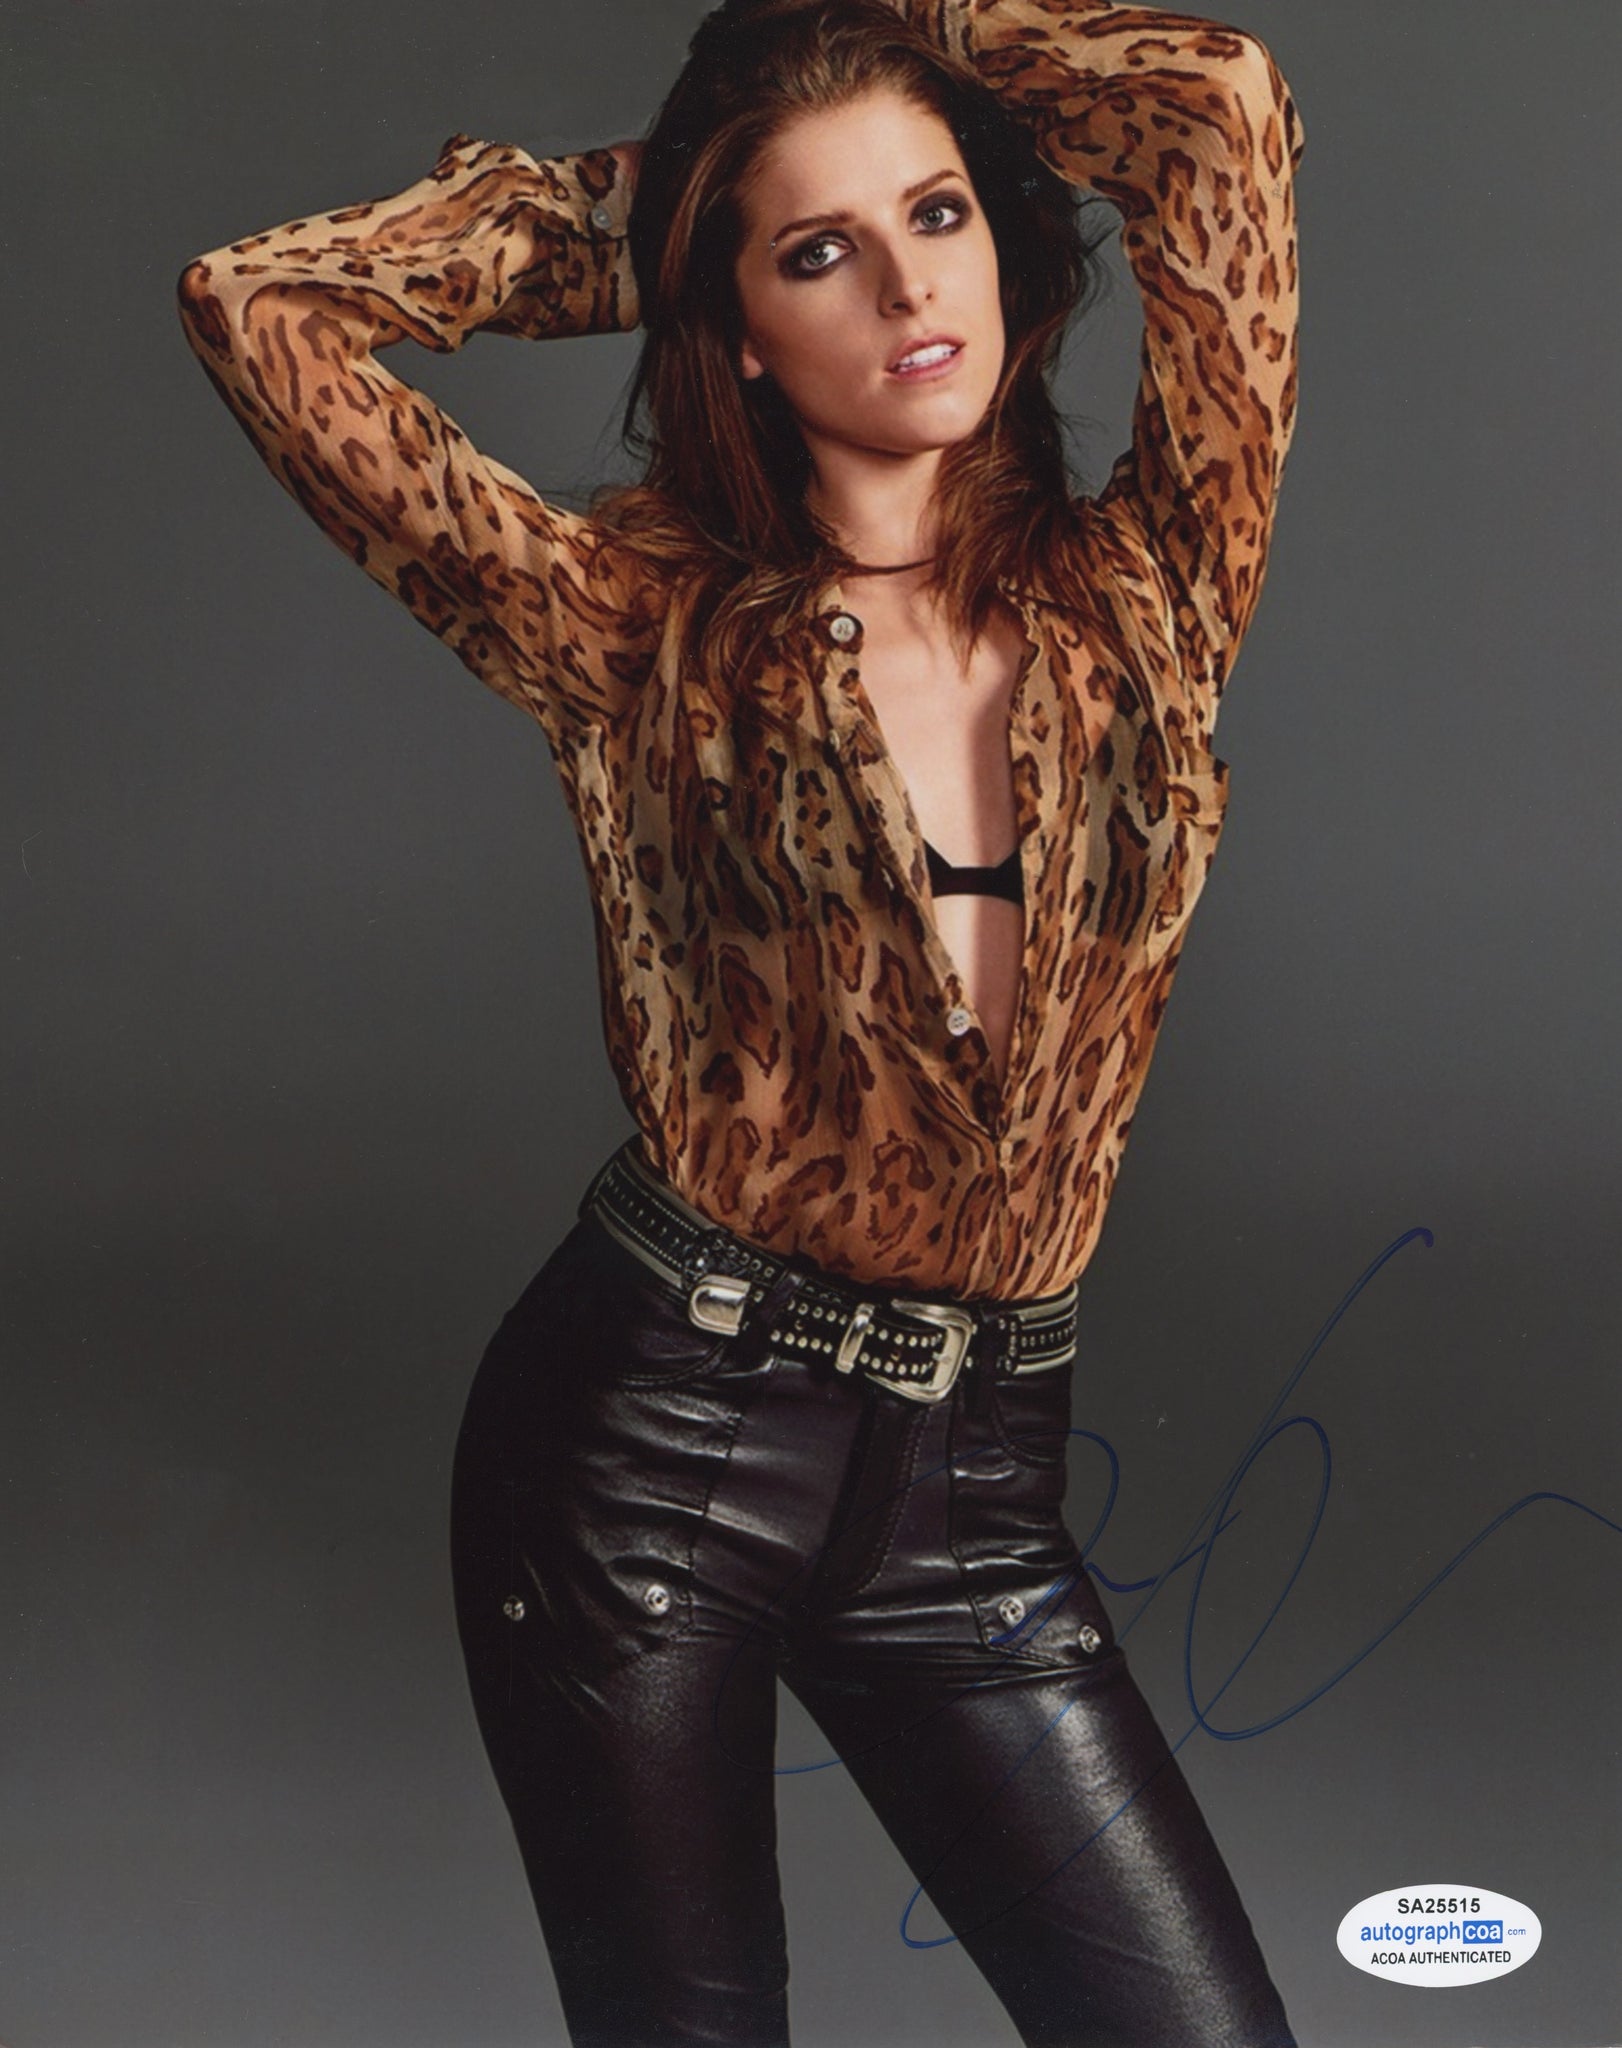 Anna Kendrick Sexy Signed Autograph 8x10 Photo ACOA #8 - Outlaw Hobbies Authentic Autographs